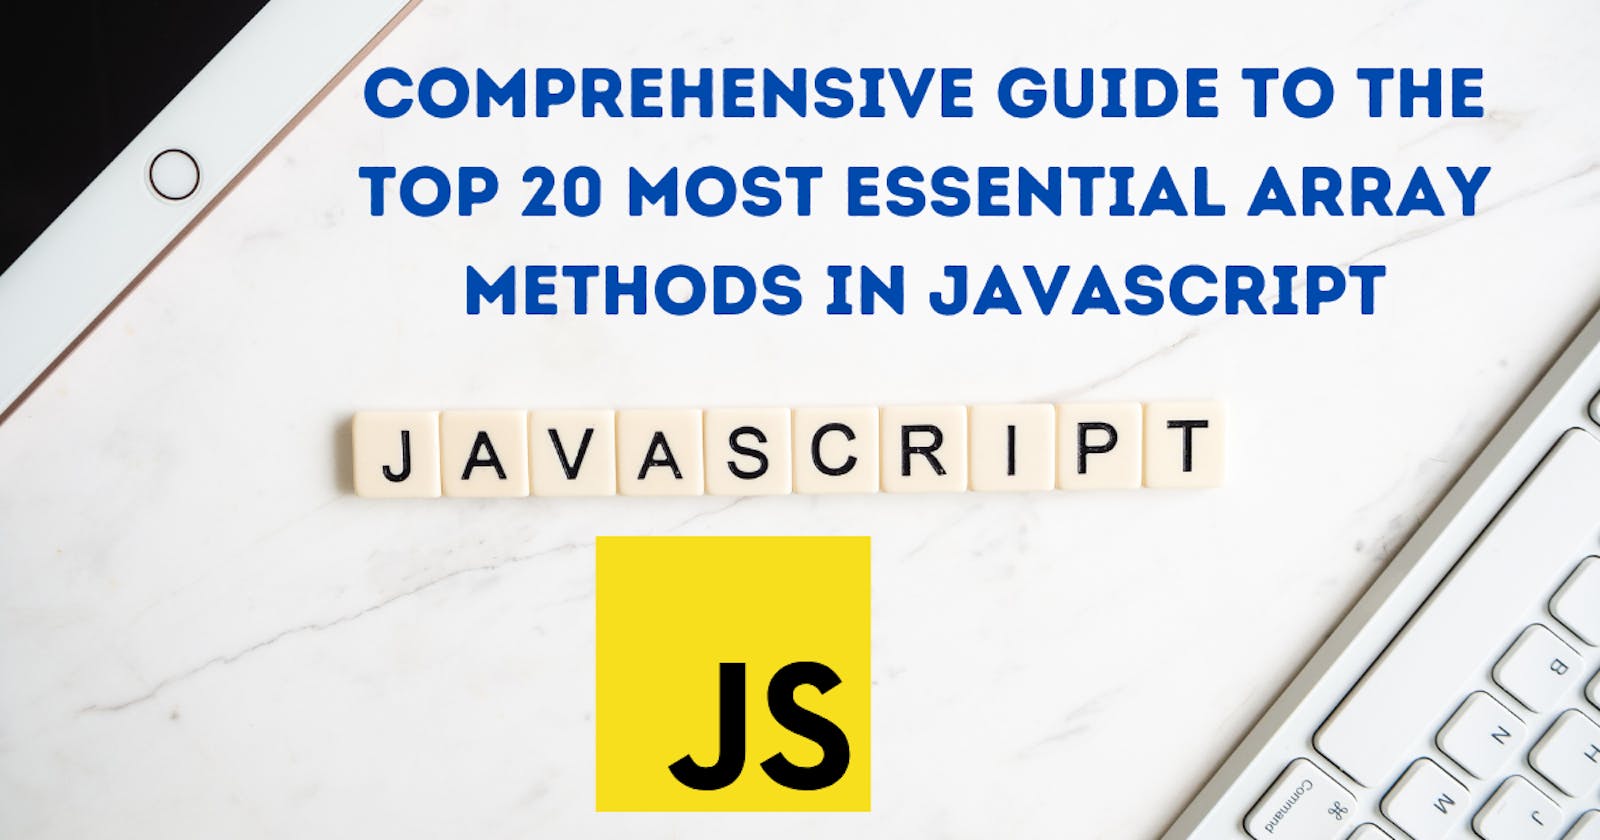 Comprehensive Guide to the Top 20 Most Essential Array Methods in JavaScript